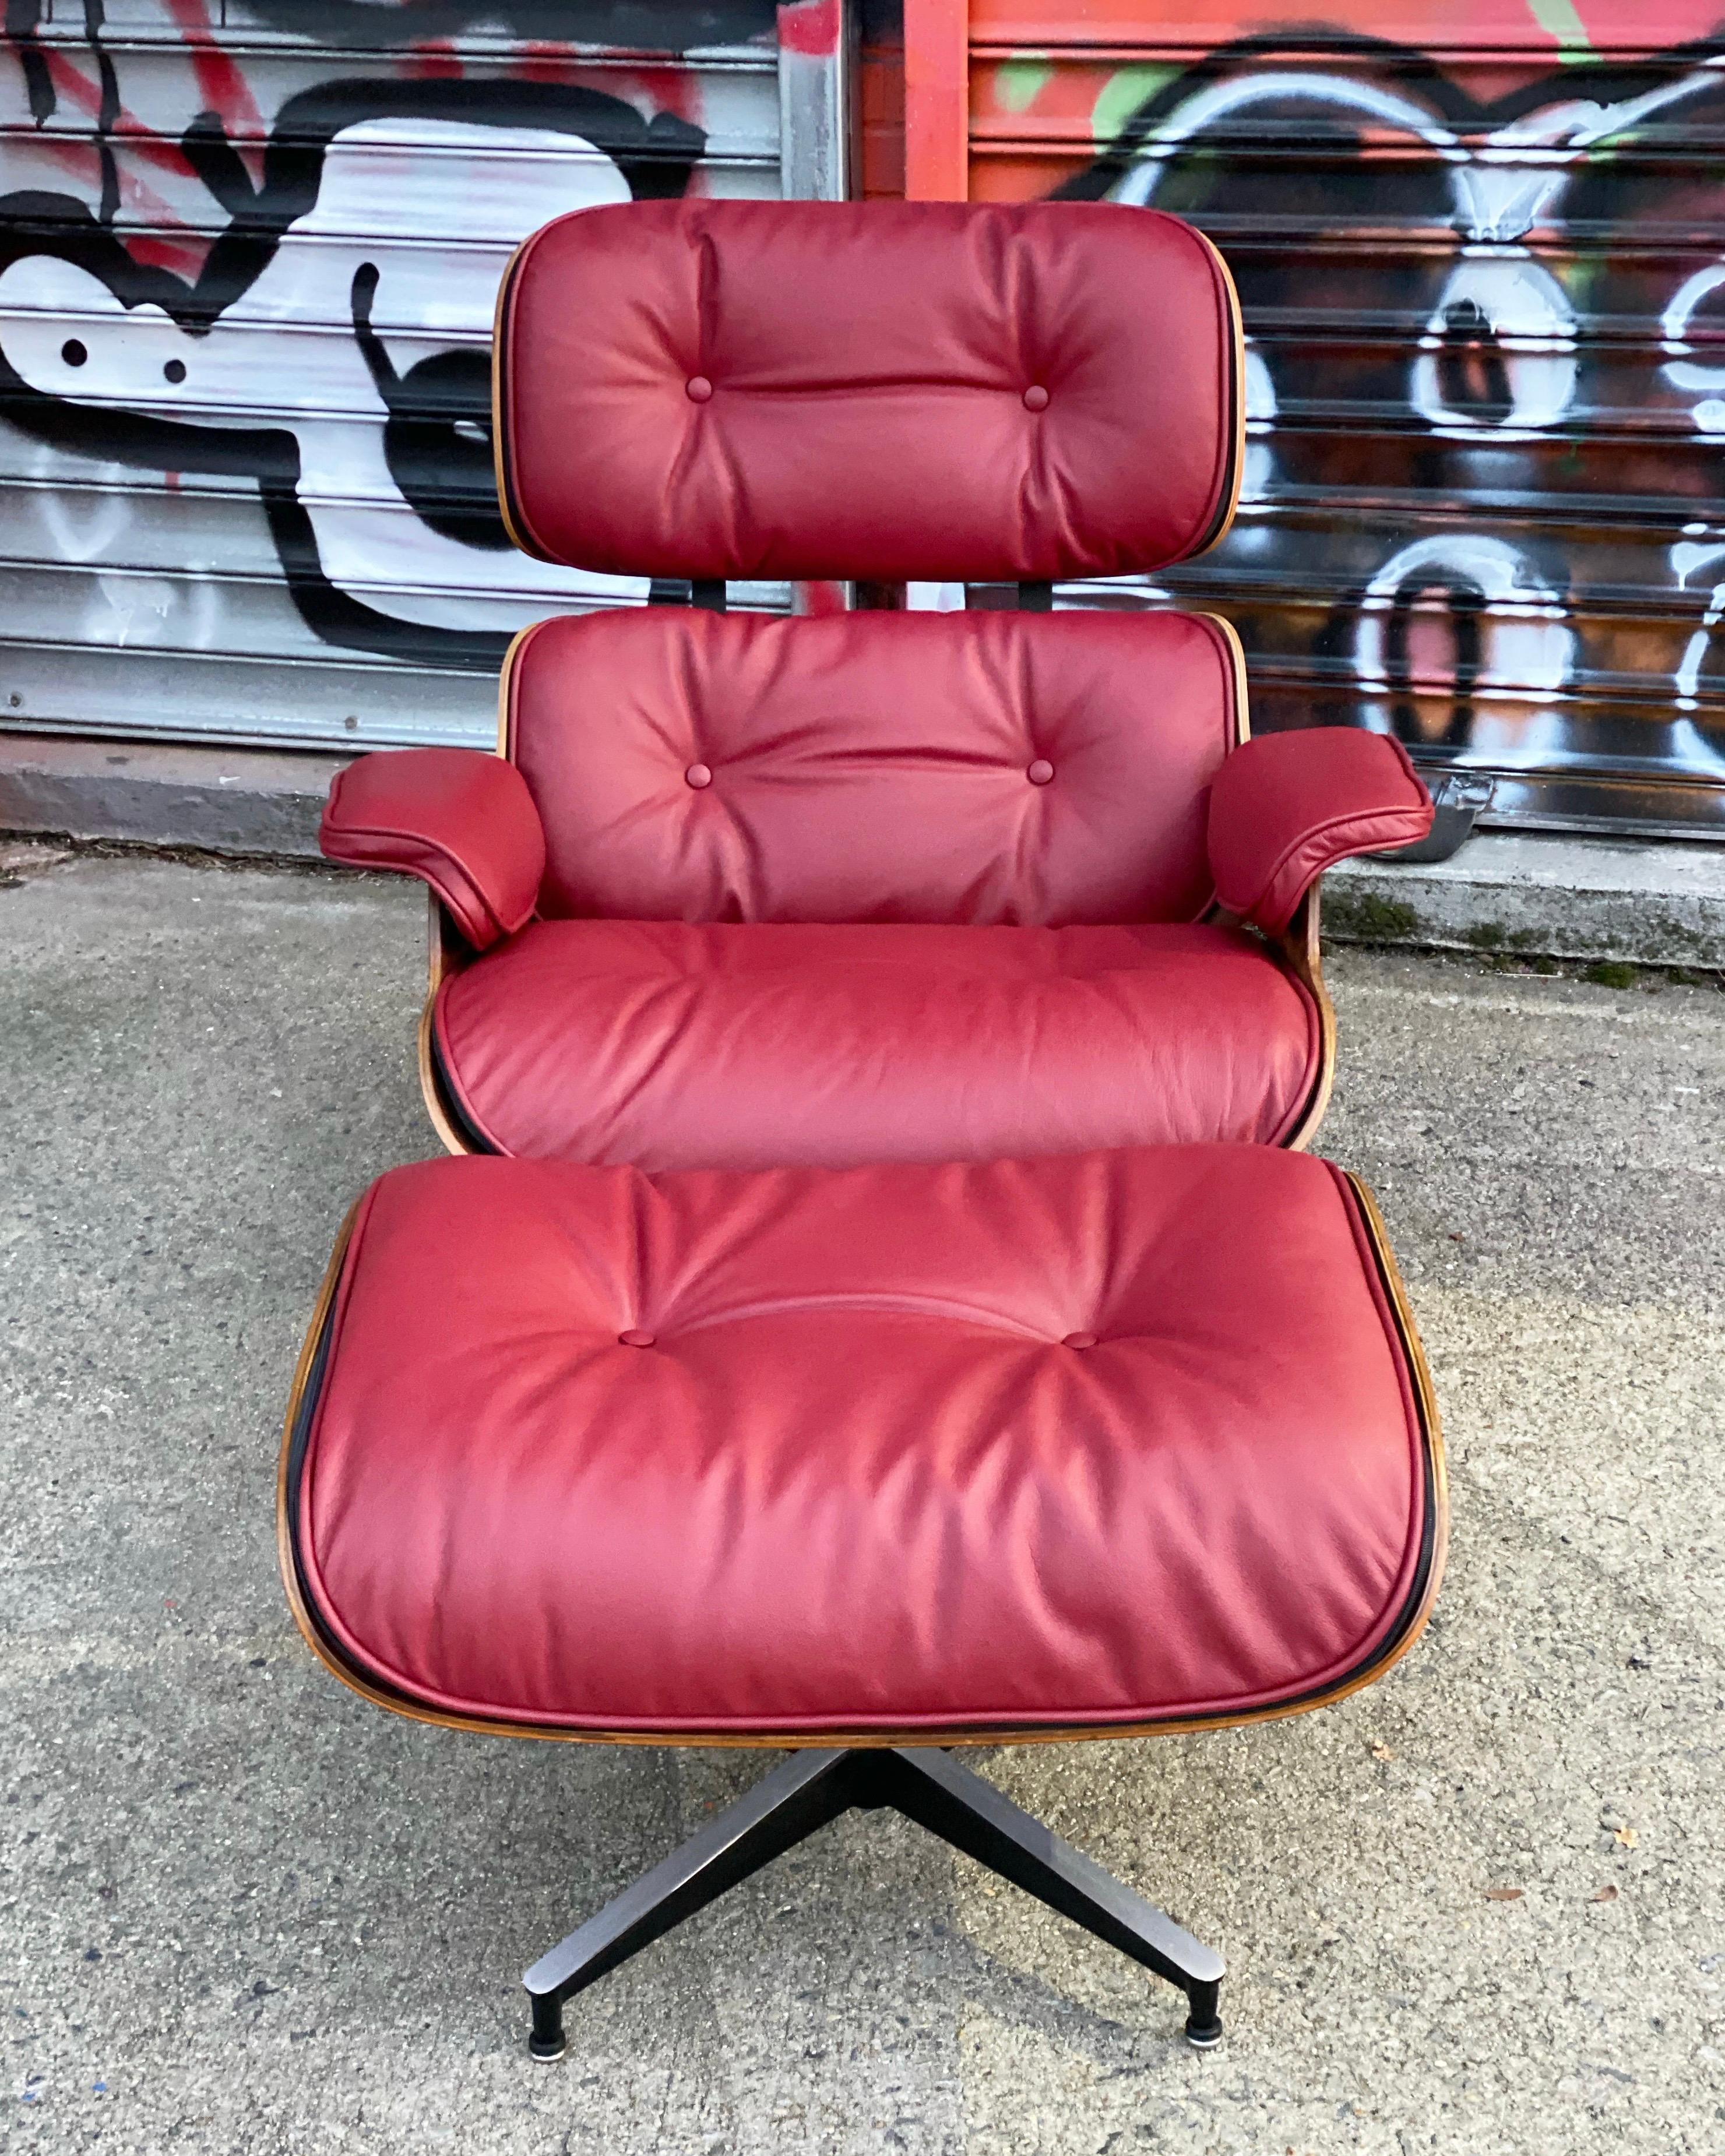 Gorgeous classic Eames lounge chair with an updated custom look. Restored vintage set in rose wood, of original Herman Miller production. Wood has been refinished and leather cushions redone in Chianti leather. Rubber shock mounts replaced in the